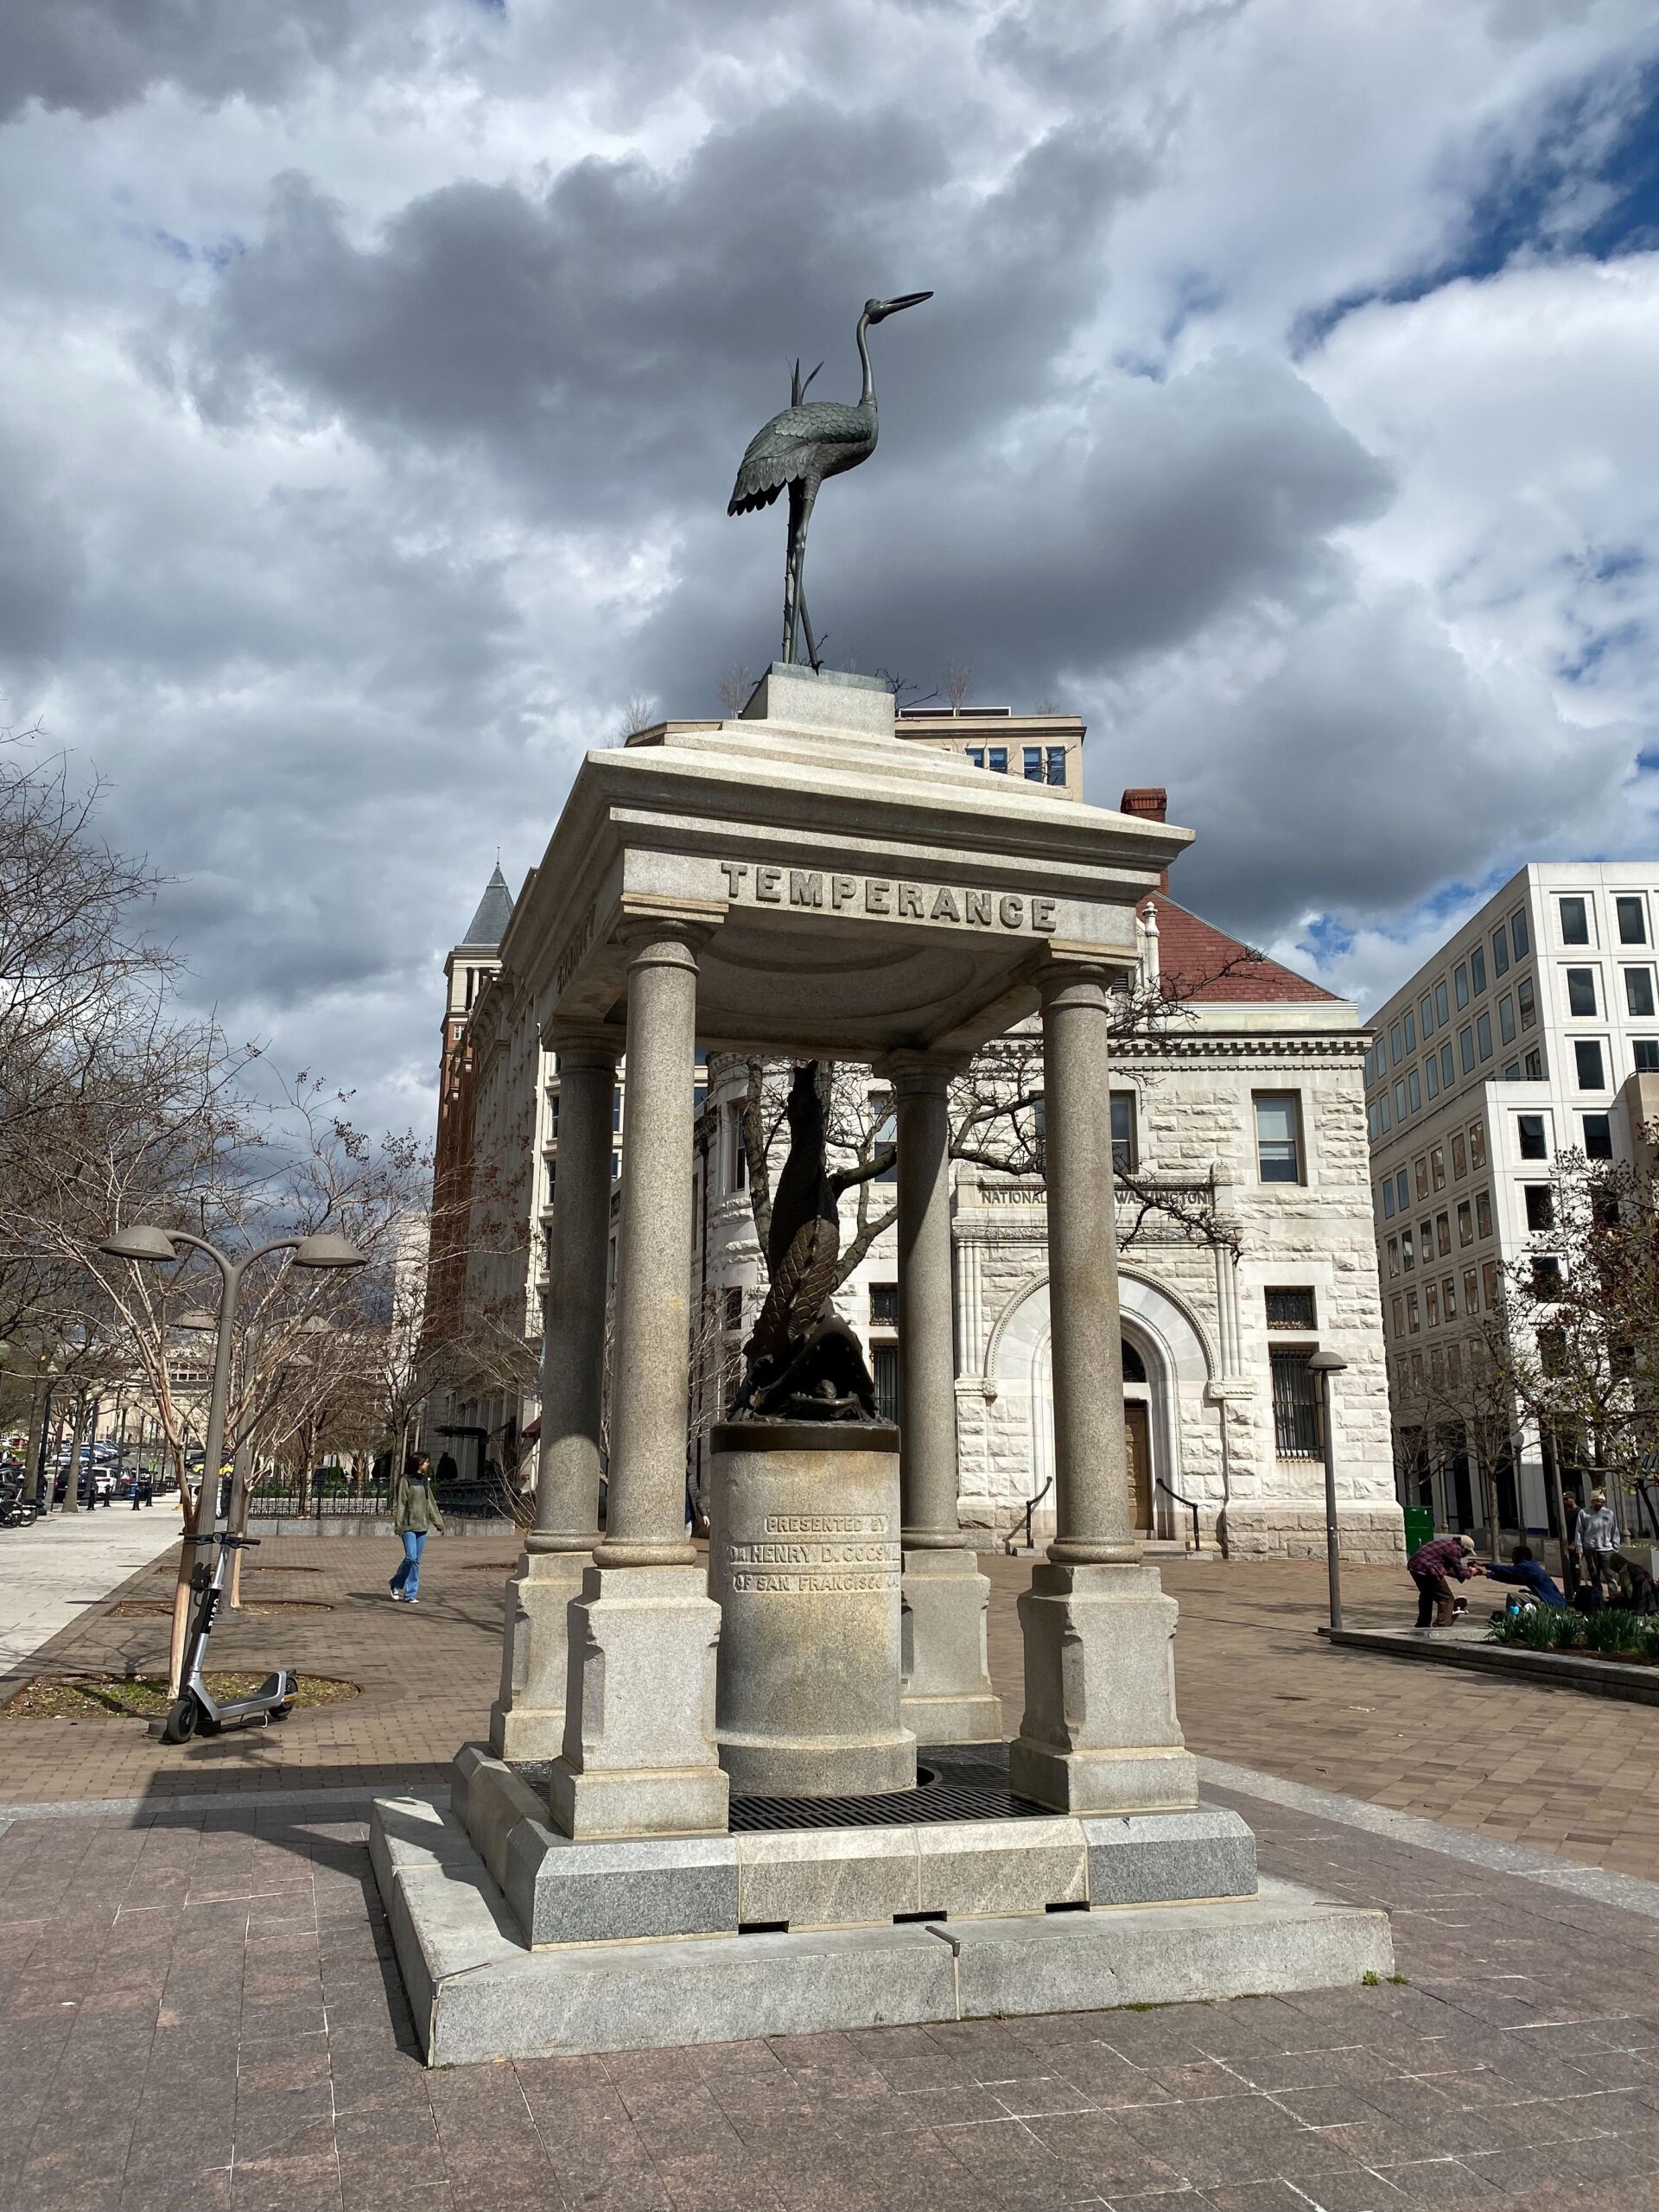 Color image of temperance fountain, with the word "Temperance" written on the facing side.